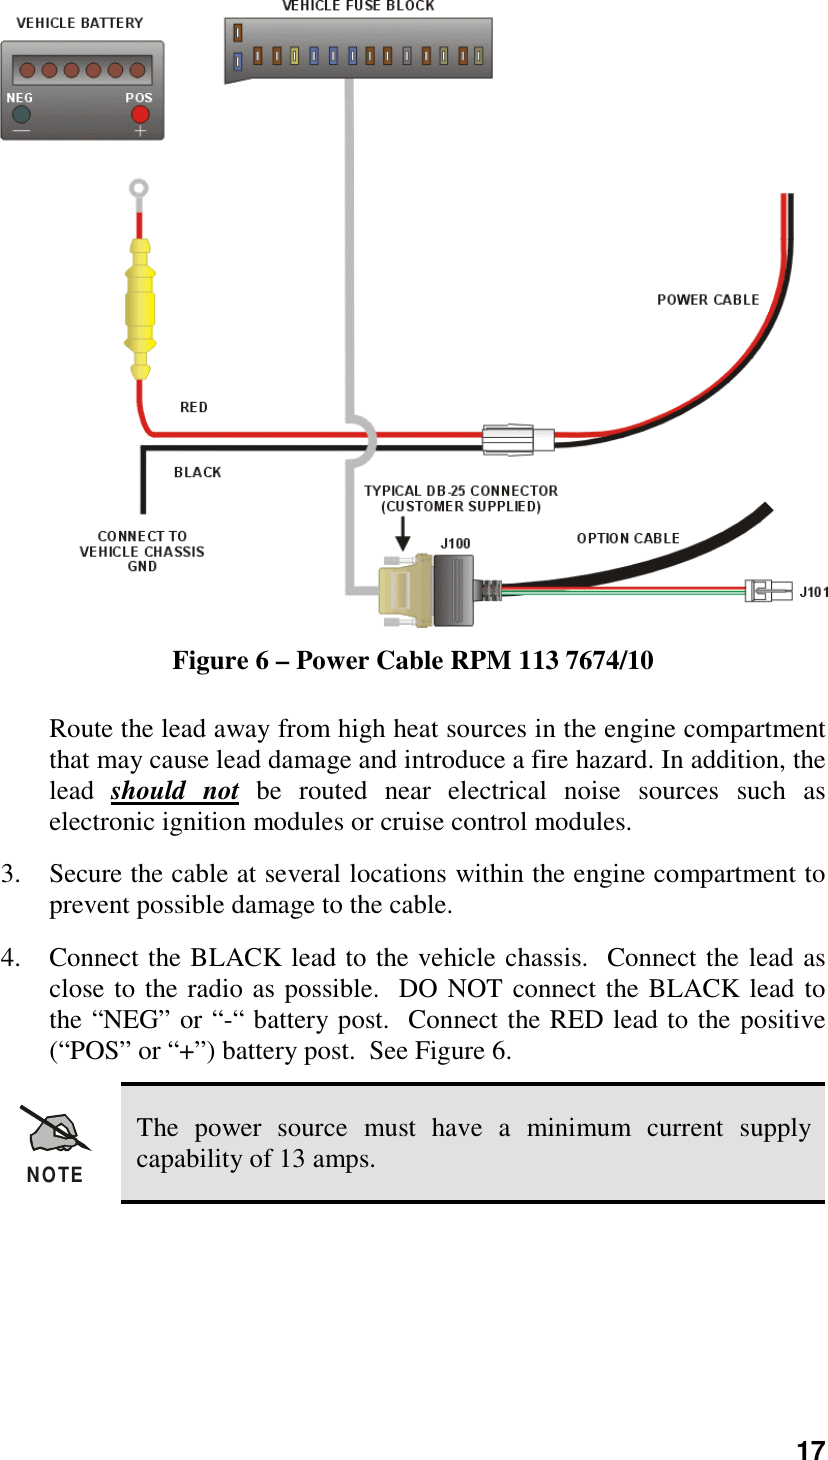 17Figure 6 – Power Cable RPM 113 7674/10Route the lead away from high heat sources in the engine compartmentthat may cause lead damage and introduce a fire hazard. In addition, thelead  should not be routed near electrical noise sources such aselectronic ignition modules or cruise control modules.3. Secure the cable at several locations within the engine compartment toprevent possible damage to the cable.4. Connect the BLACK lead to the vehicle chassis.  Connect the lead asclose to the radio as possible.  DO NOT connect the BLACK lead tothe “NEG” or “-“ battery post.  Connect the RED lead to the positive(“POS” or “+”) battery post.  See Figure 6.NOTEThe power source must have a minimum current supplycapability of 13 amps.